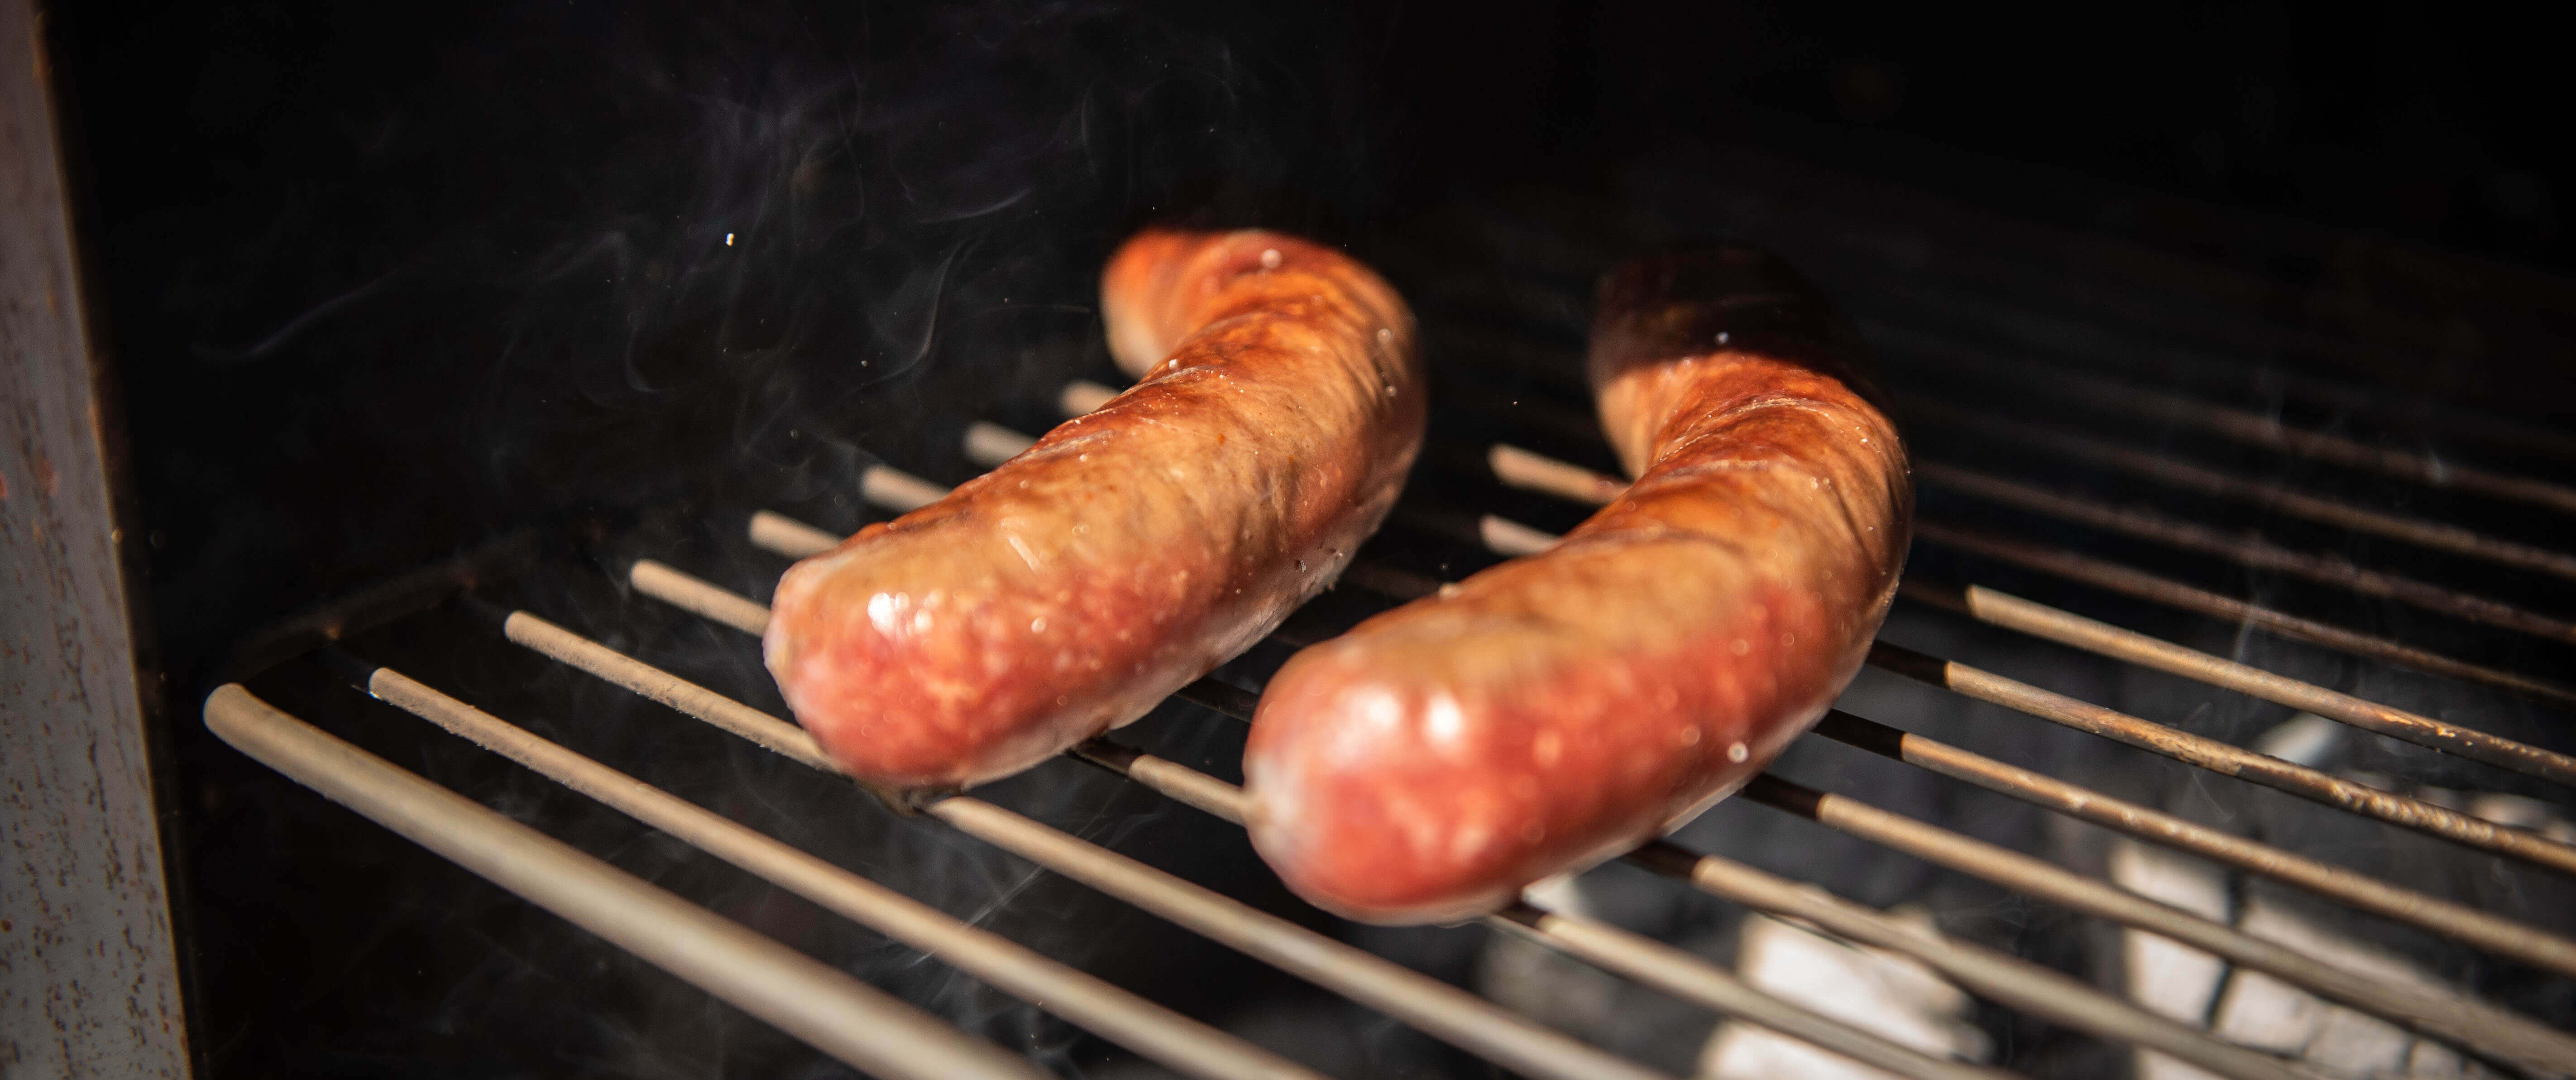 Grill-Outdooroven-sausage-meat-Weltevree